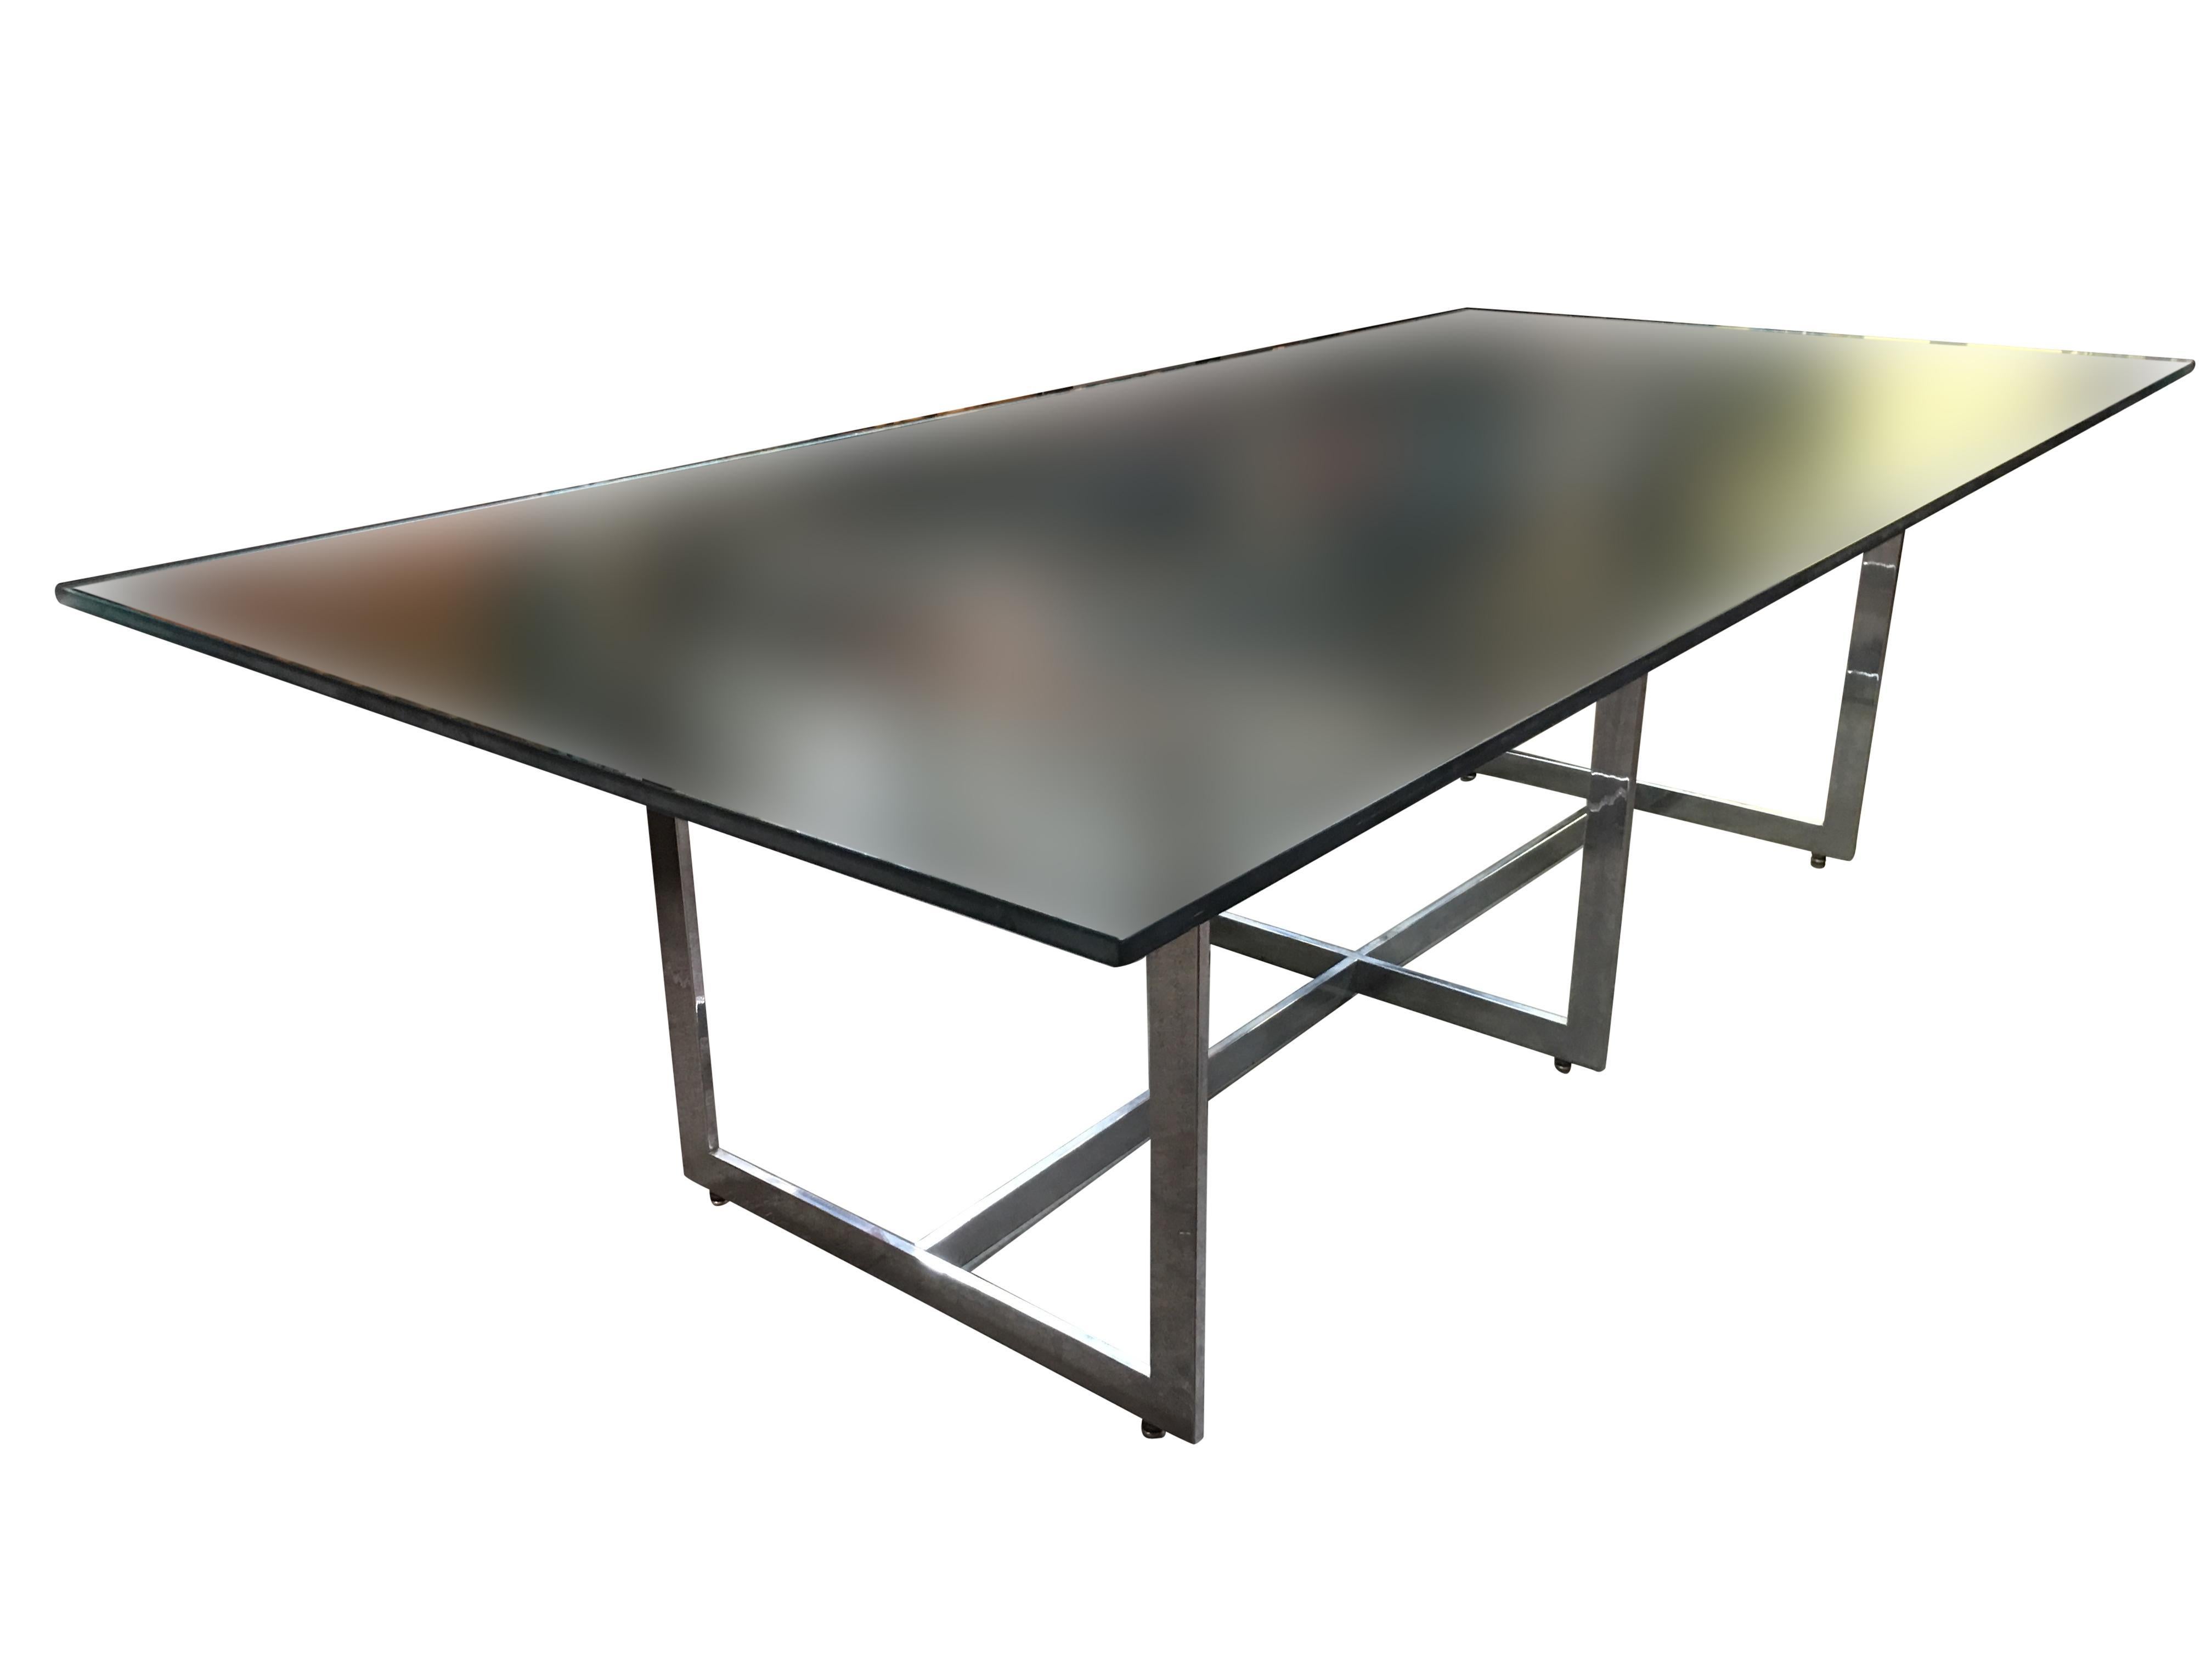 Large 8 person glass dining room table with a sculptural chrome base in the style Milo Baughman. The dining table comes with a 3/4